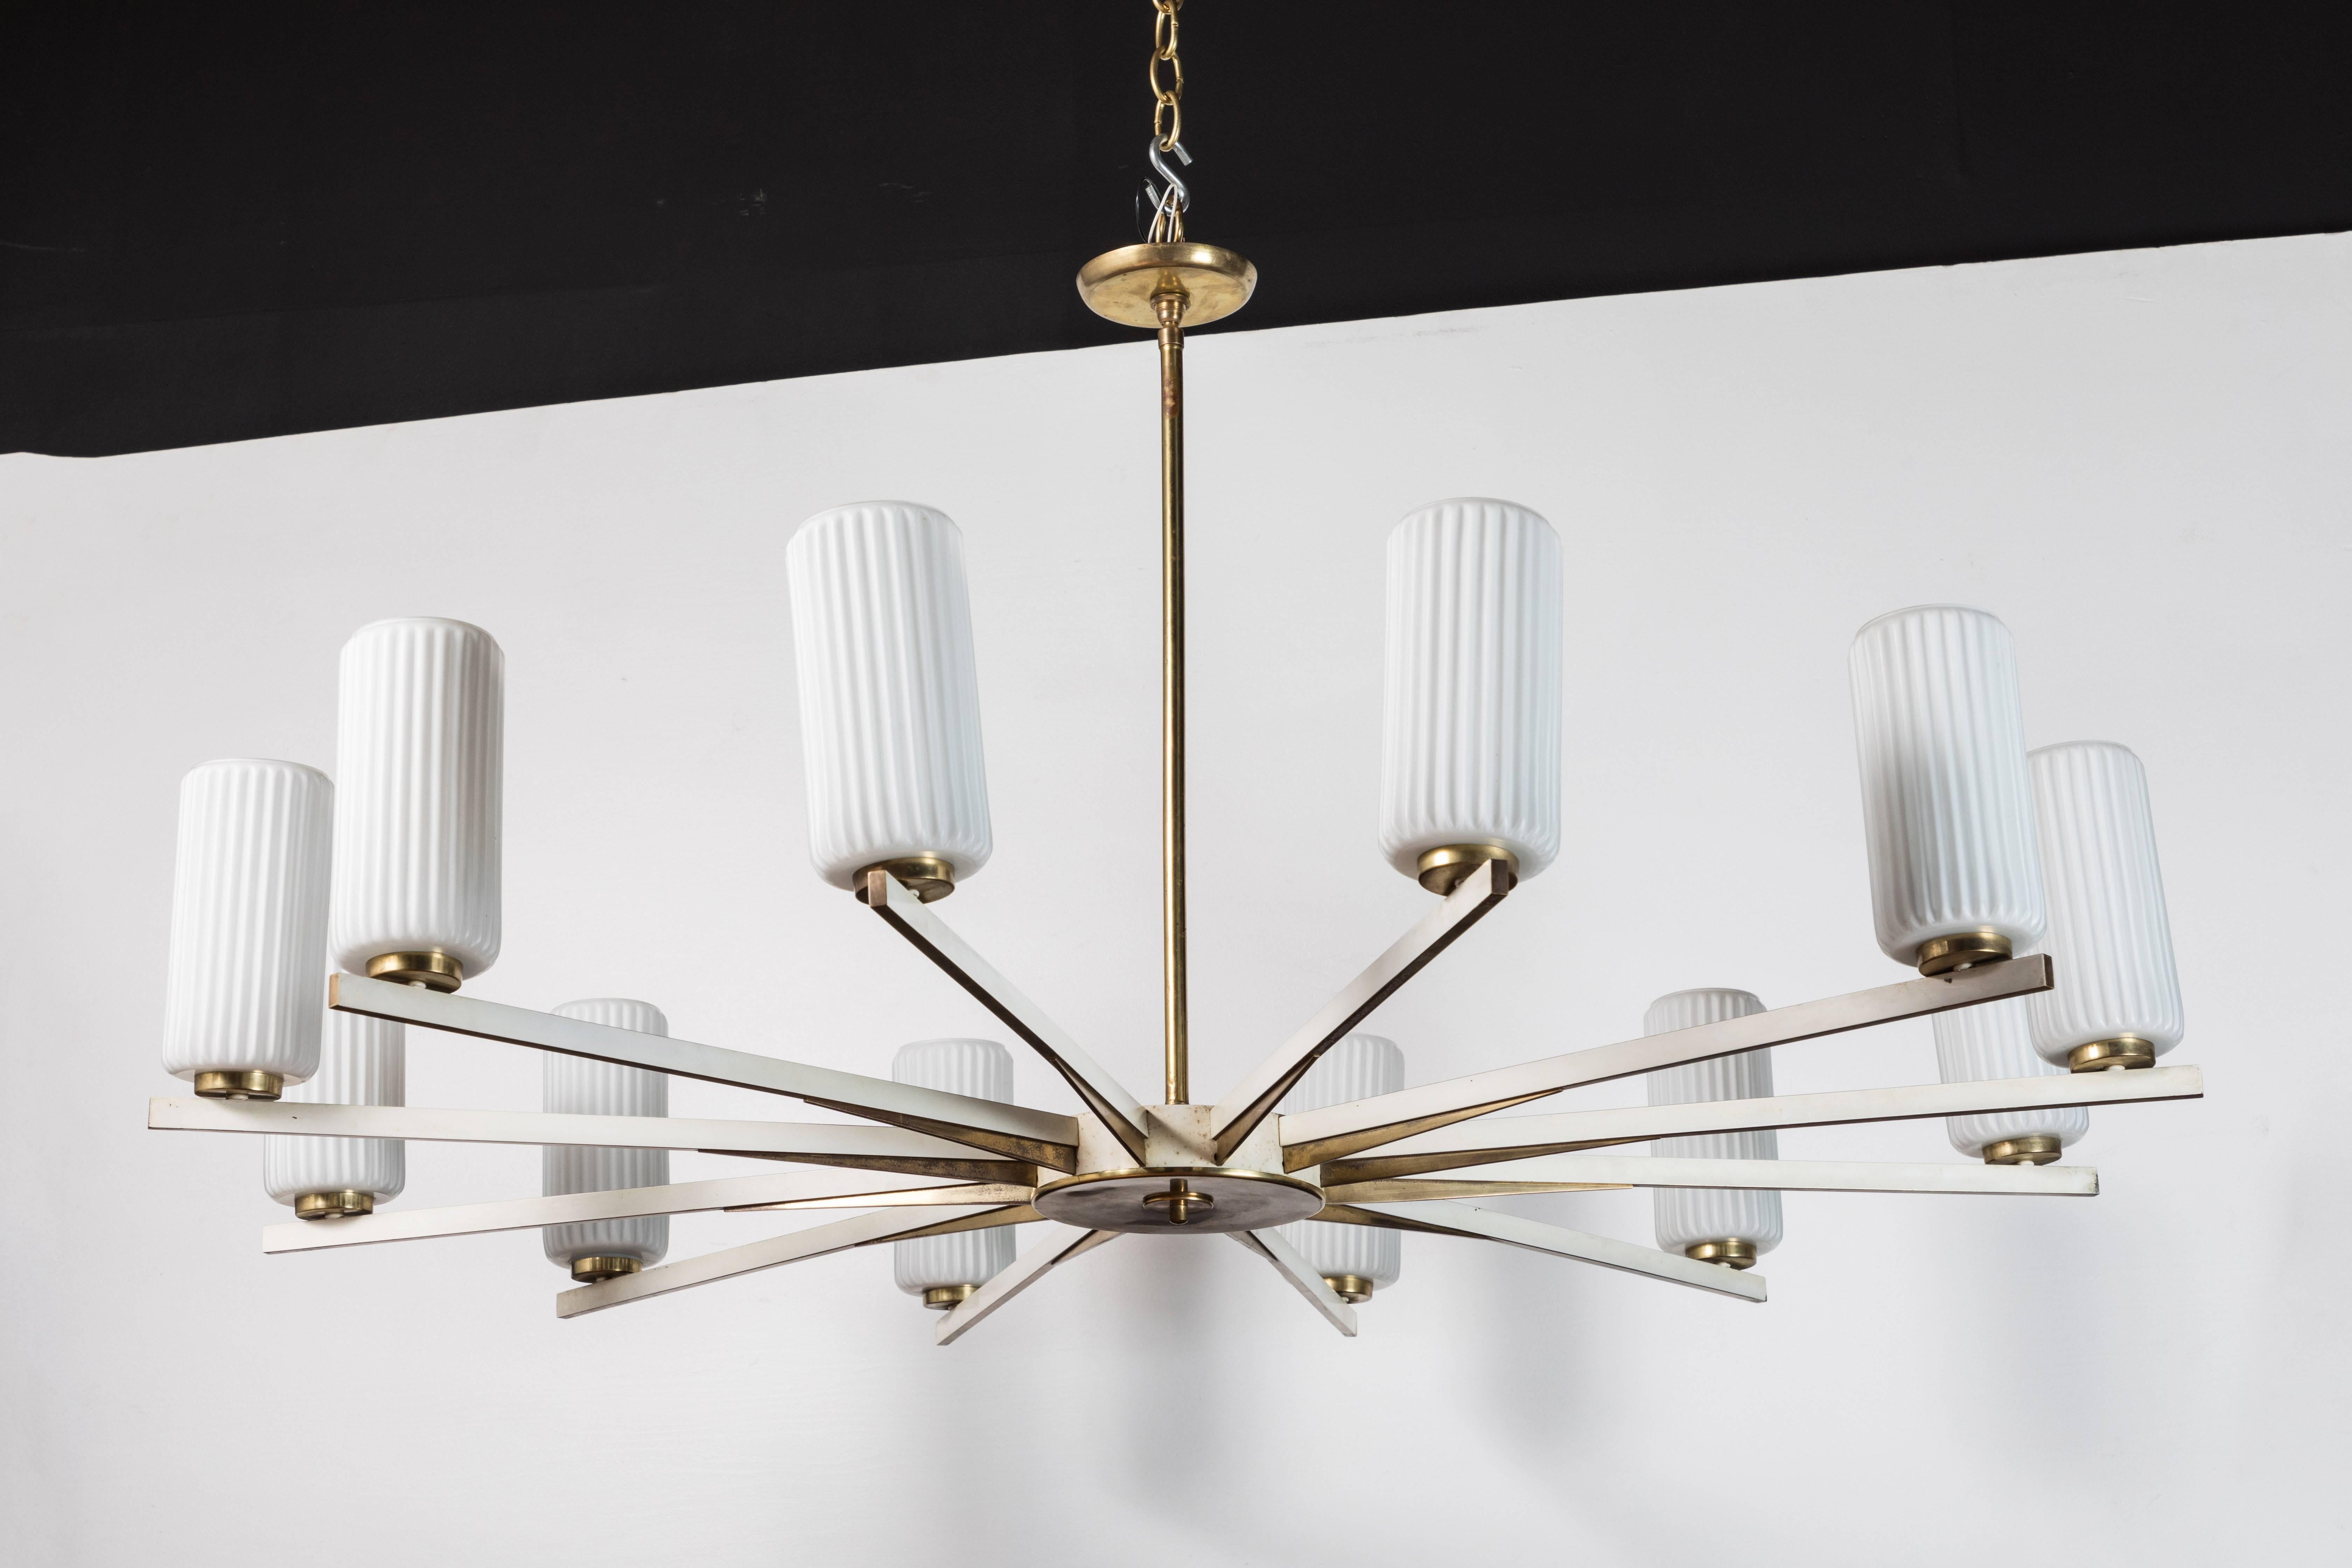 Twelve-light fixture attributed to Stilnovo. Original wear consistent with age.